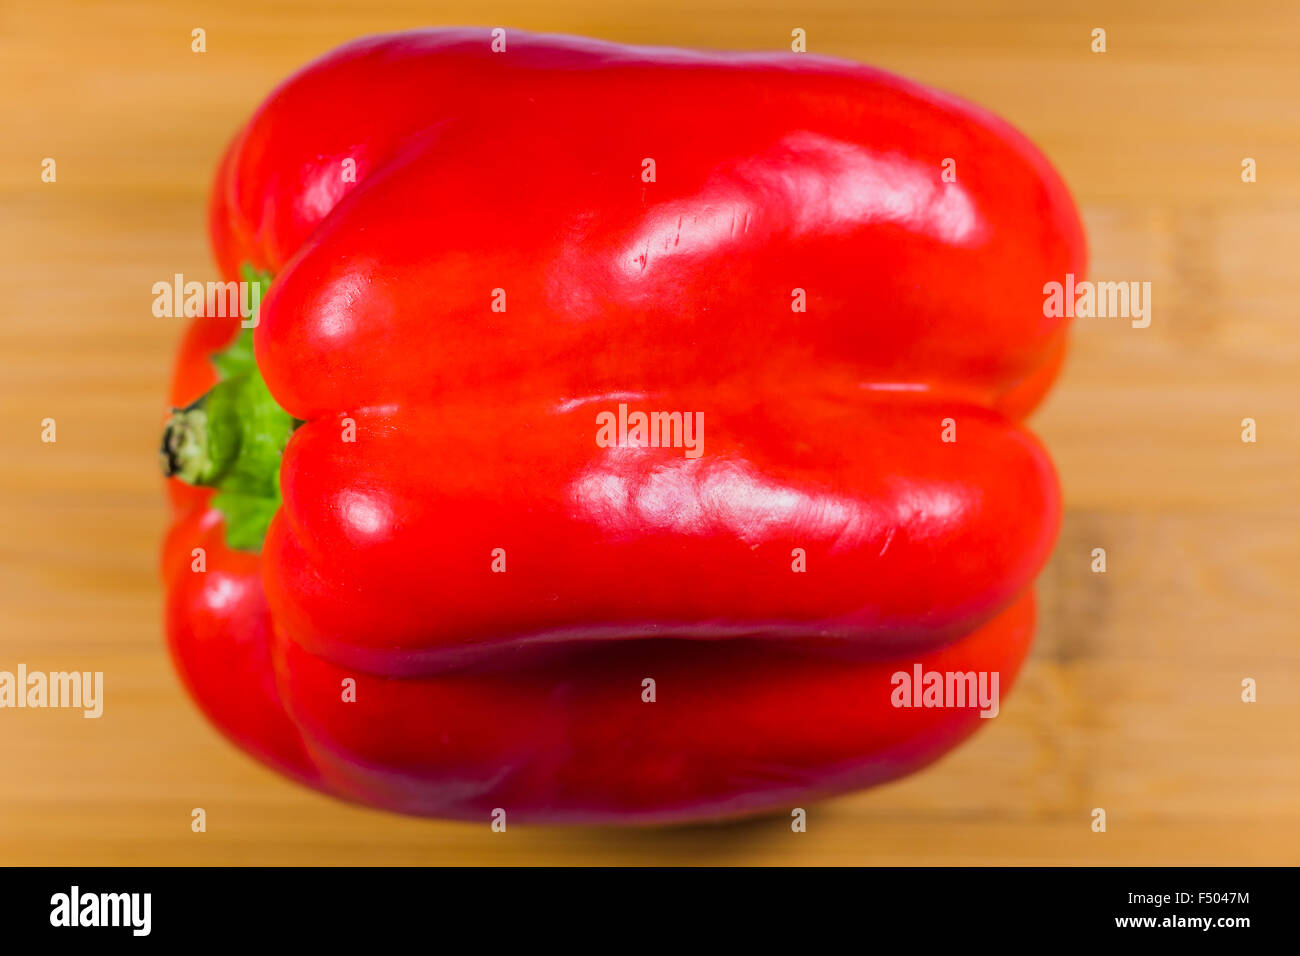 Red bell pepper on wooden table Stock Photo